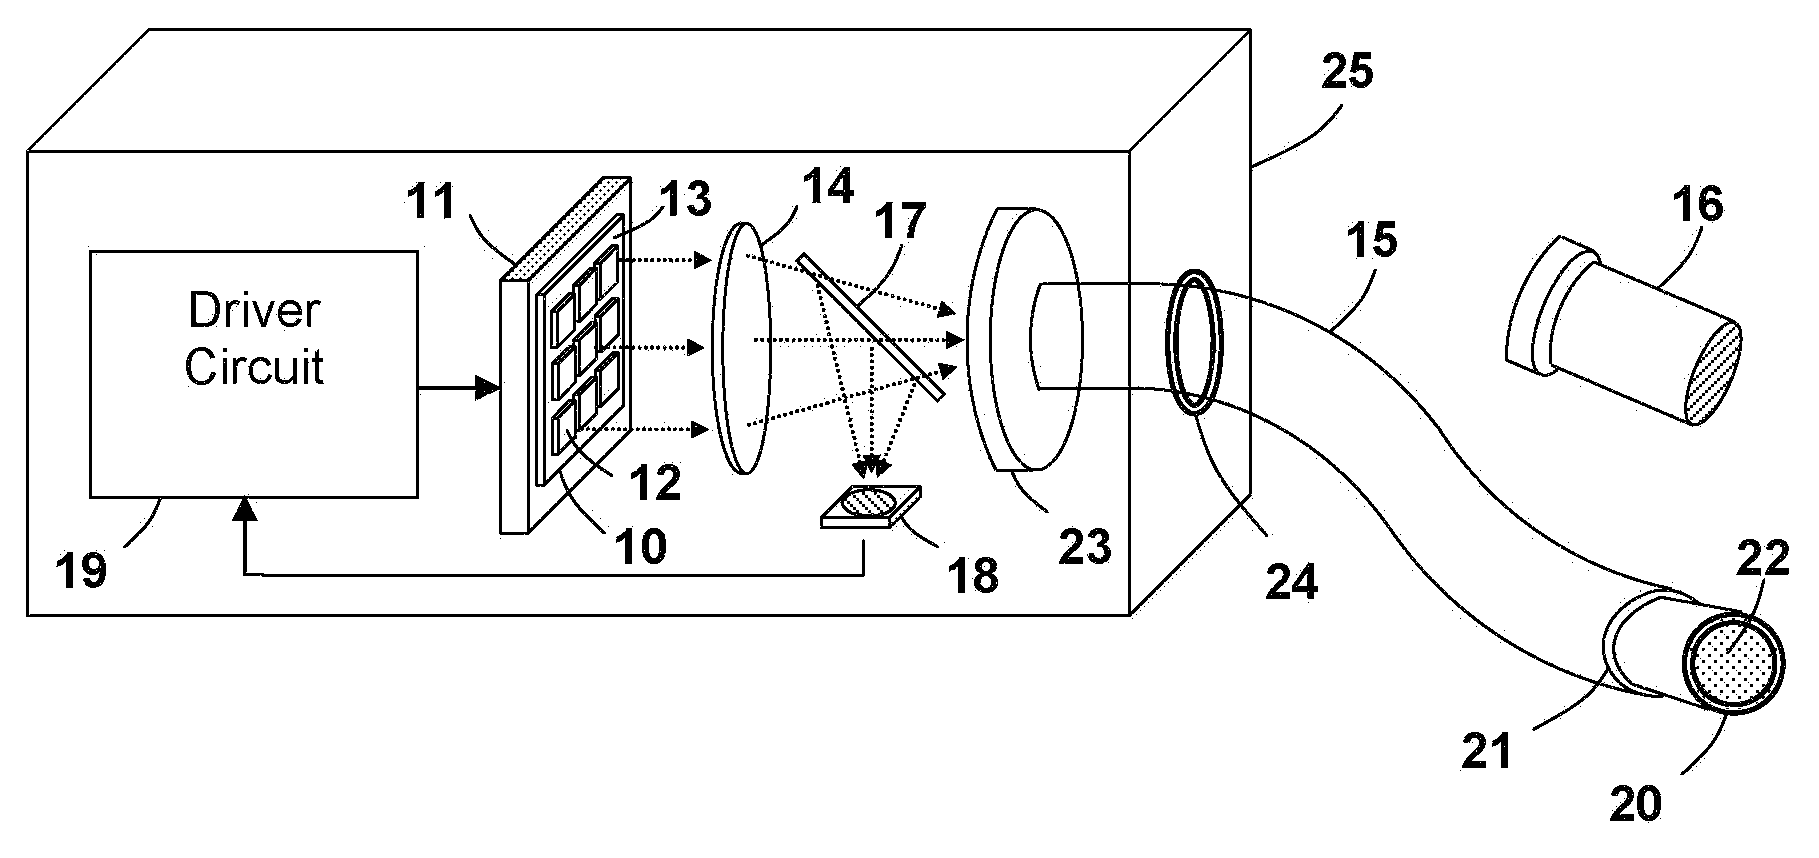 Light emitting apparatus for medical applications